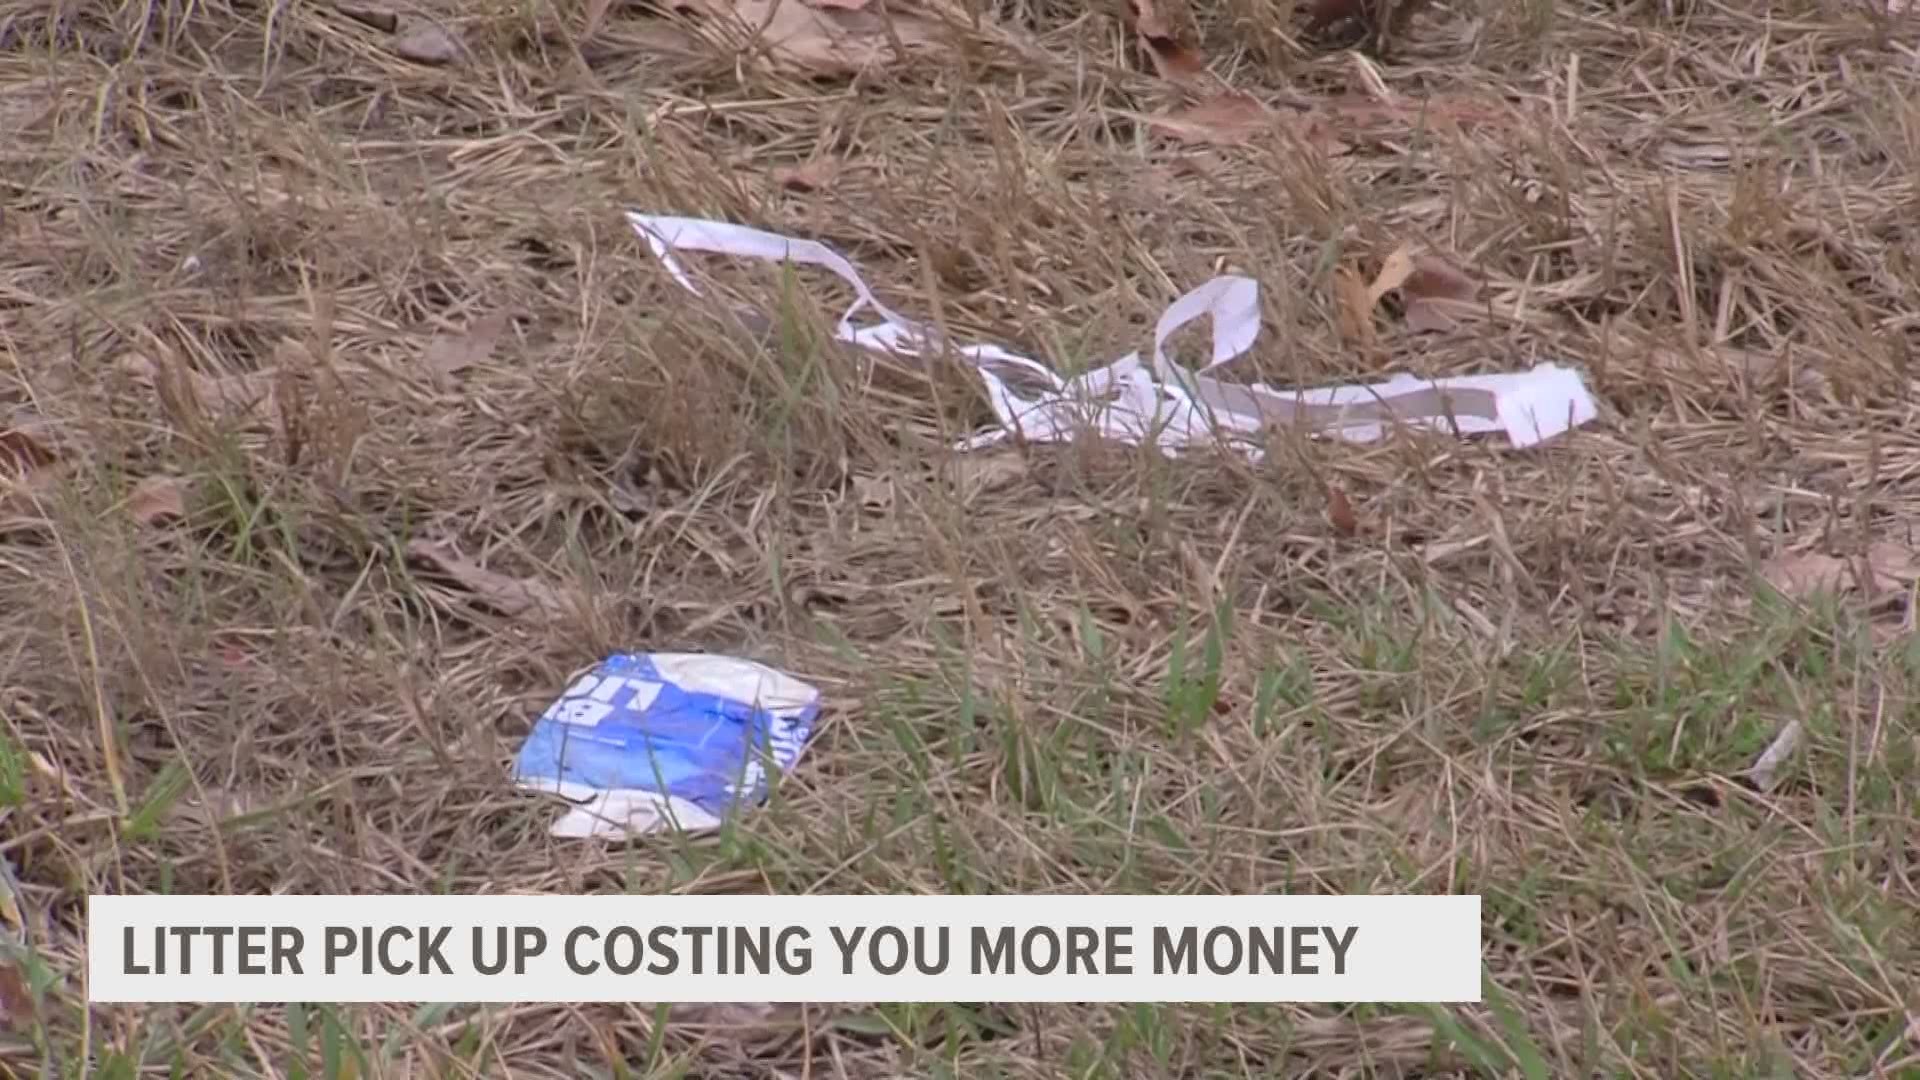 Iowa inmates usually clean up the trash on roadsides during the spring, but, of course, COVID-19 changed those plans. It's also costing Iowans more money.